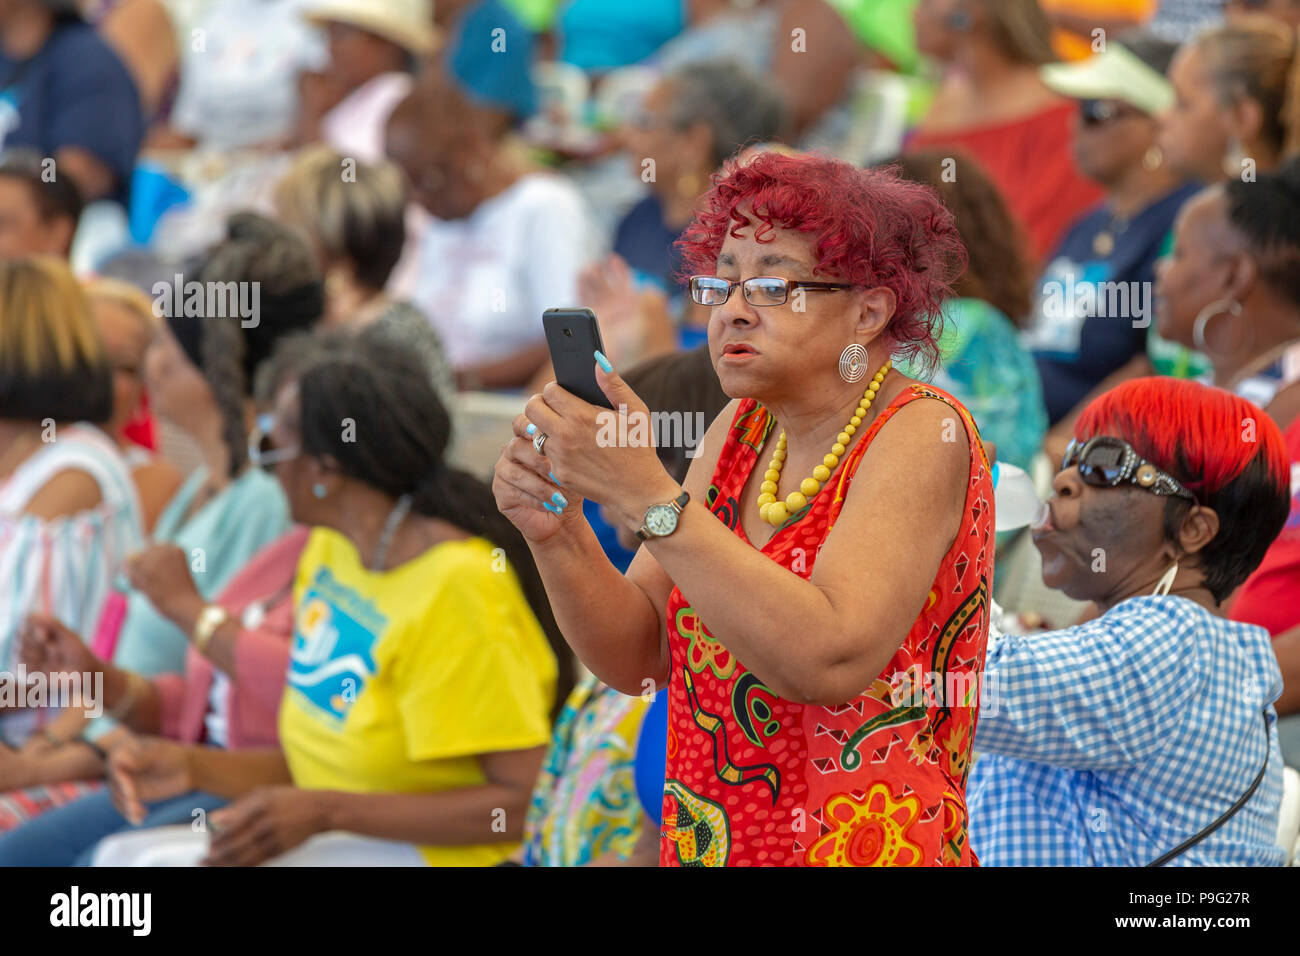 Detroit, Michigan - A woman uses her cell phone to film the action during Senior Friendship Day, an event that brought several thousand senior citizen Stock Photo